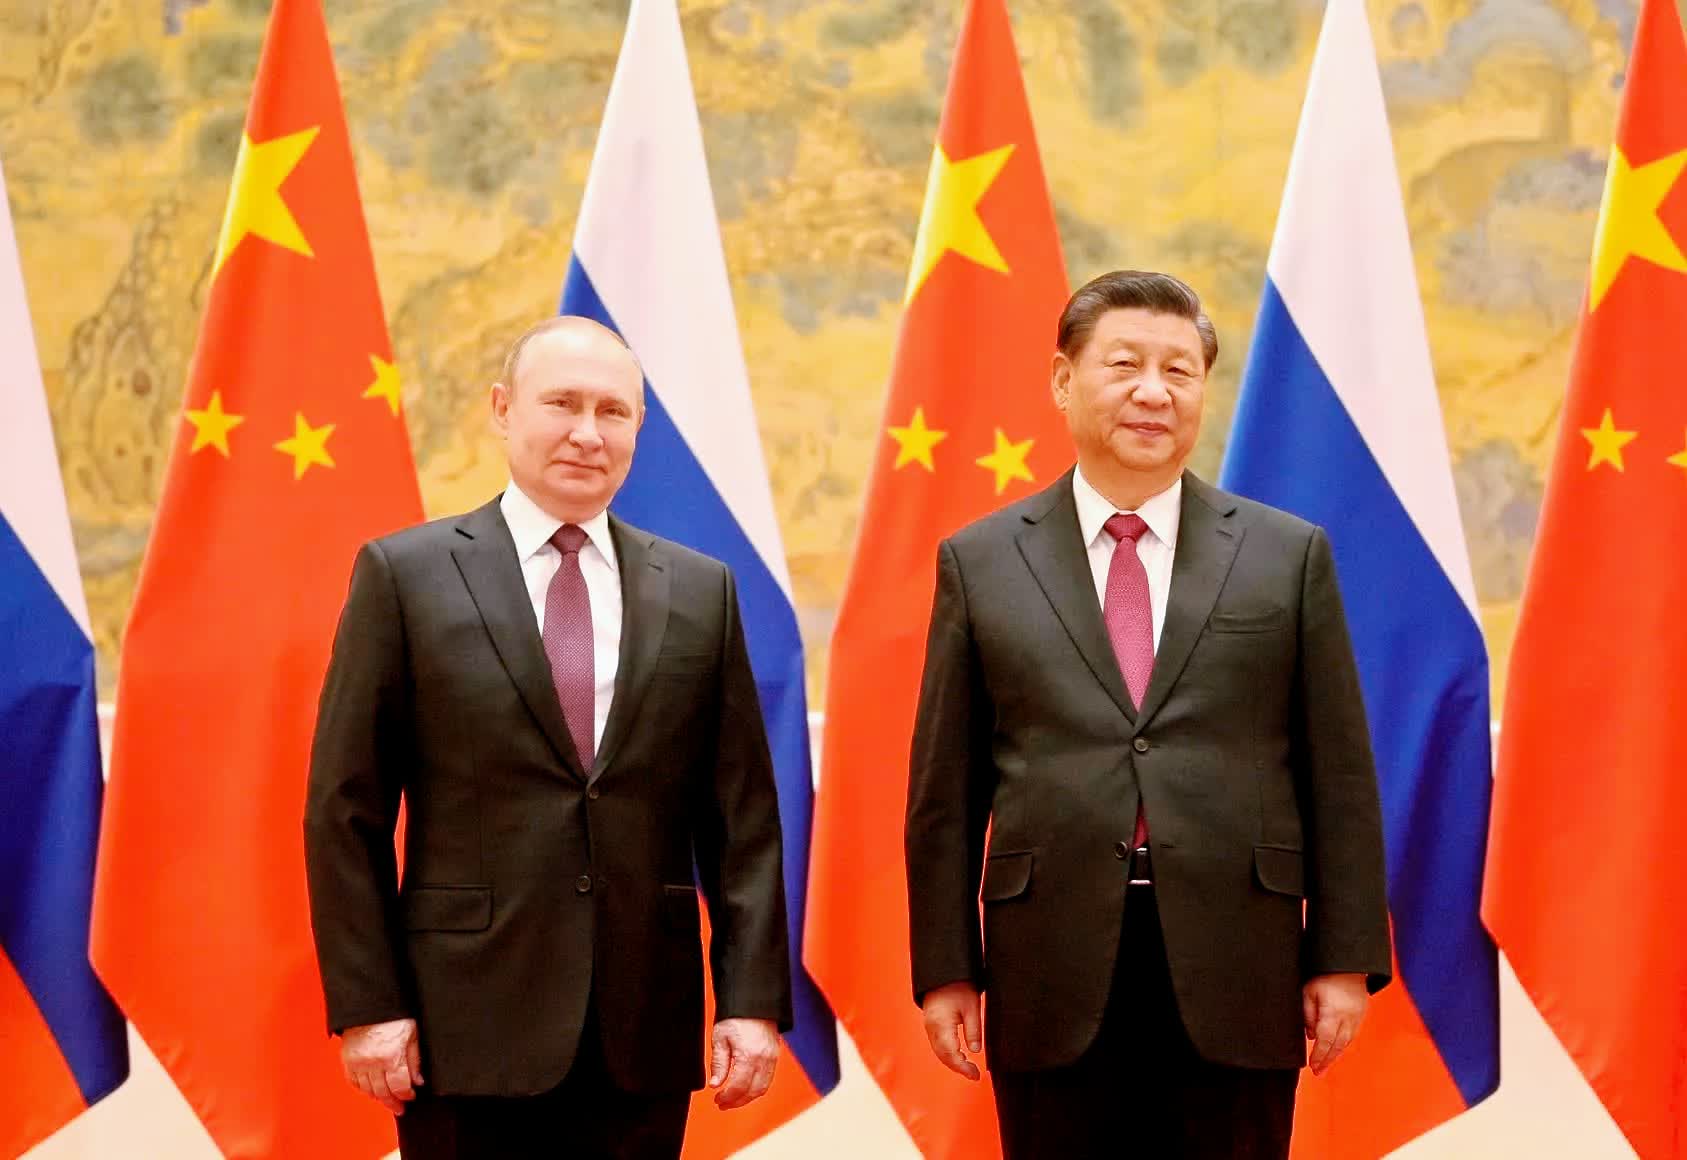 Russia and China want to become world leaders in tech, security, and AI